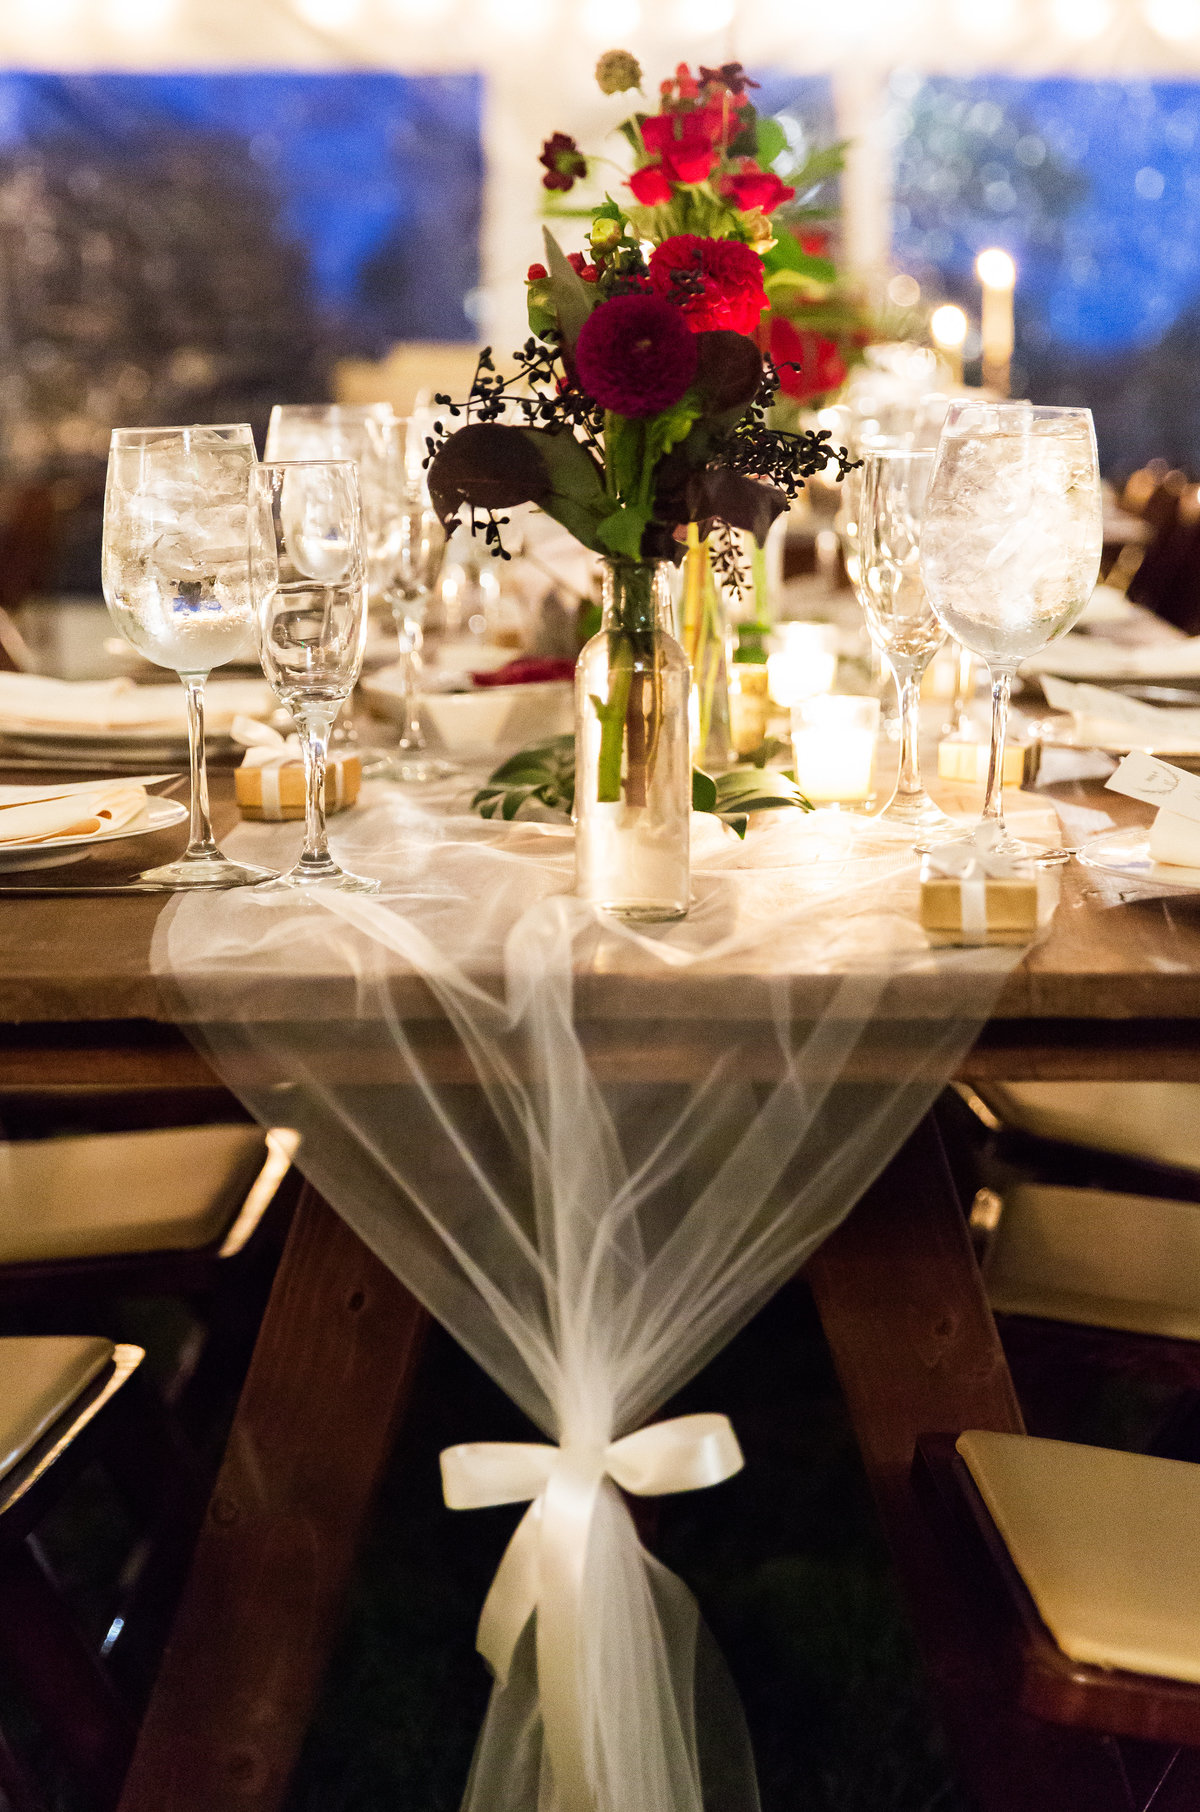 Wedding tablescape with white table runner